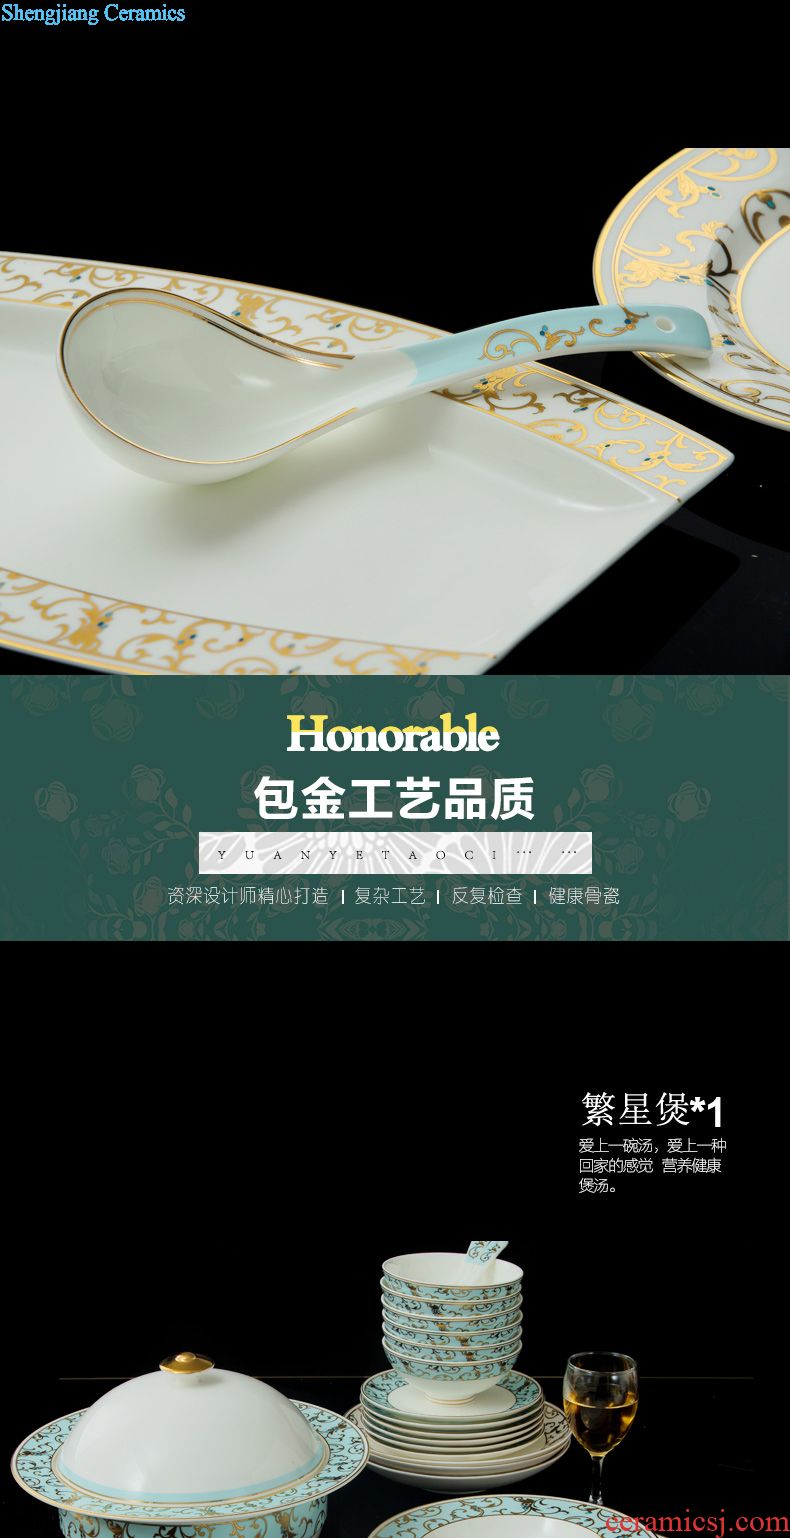 Jingdezhen high-grade bone China tableware suit 60 head of pottery and porcelain bowl dish dish sets Marry a housewarming luxury gifts